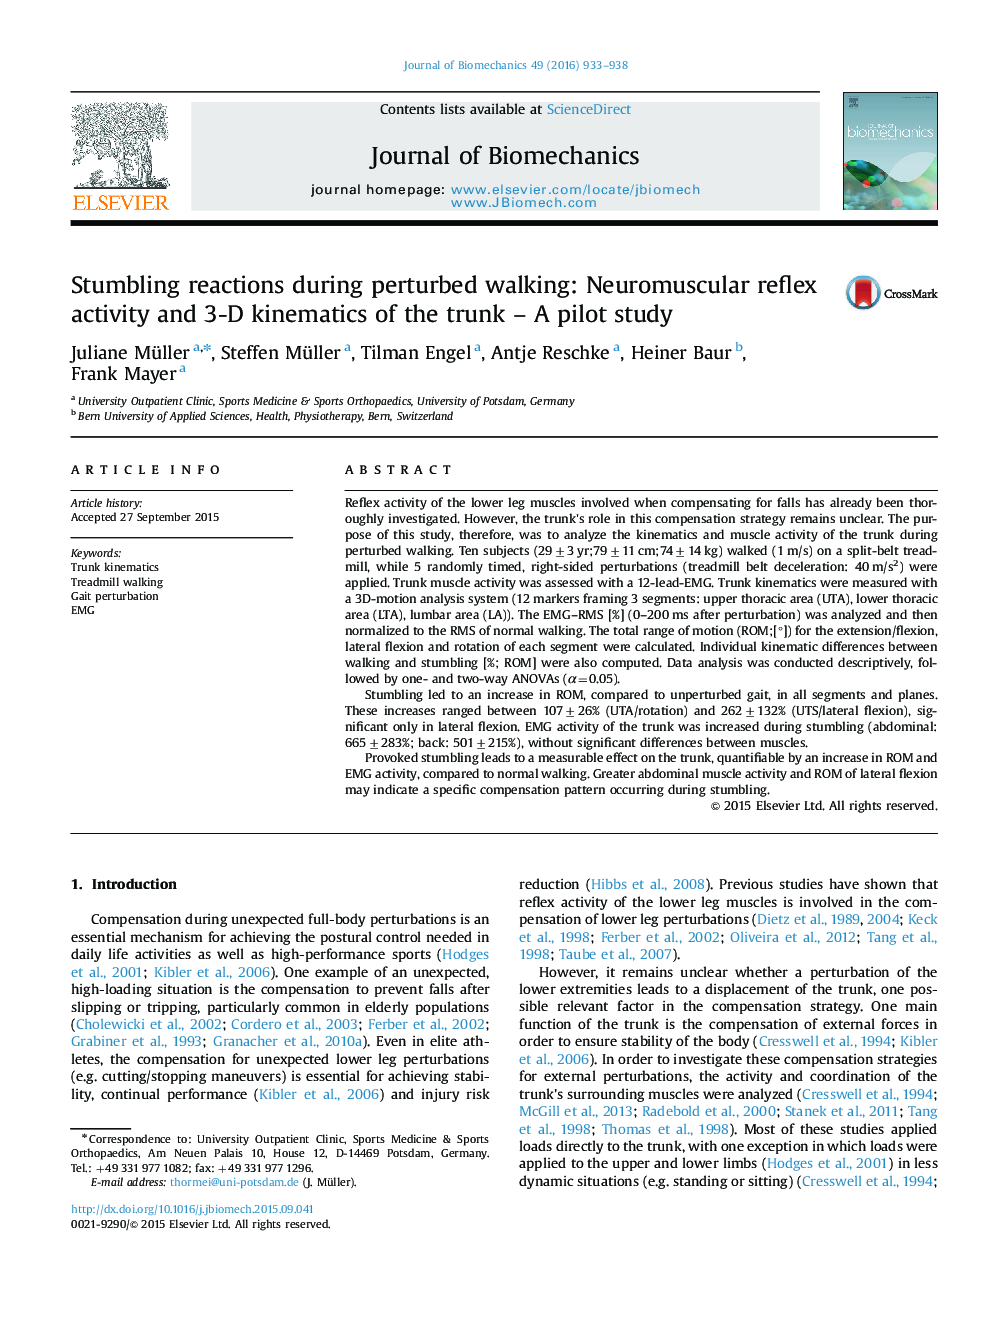 Stumbling reactions during perturbed walking: Neuromuscular reflex activity and 3-D kinematics of the trunk – A pilot study